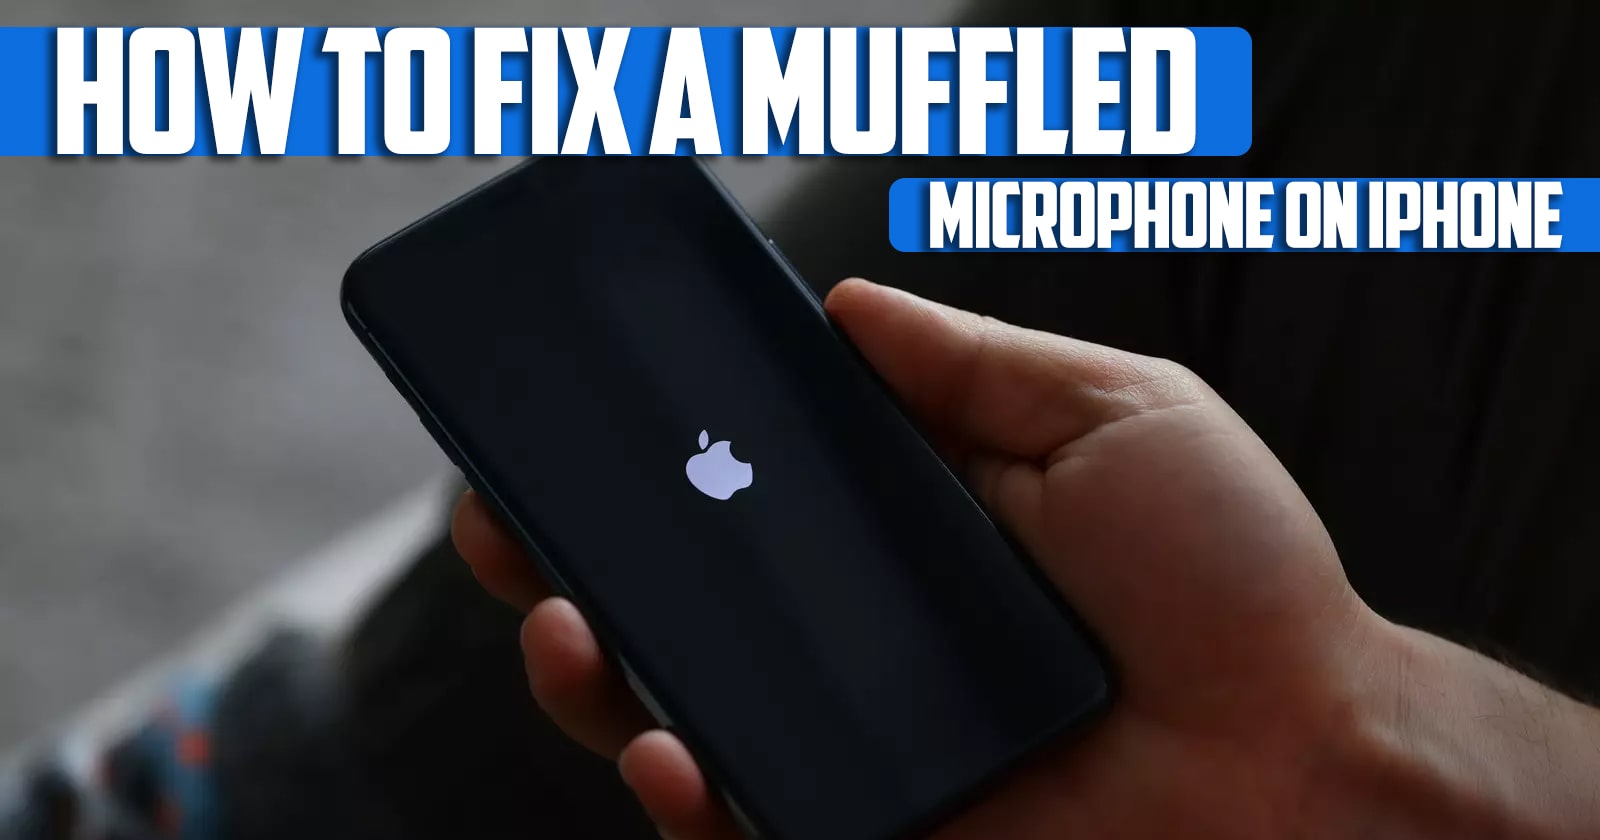 How to Fix a Muffled Microphone on iPhone